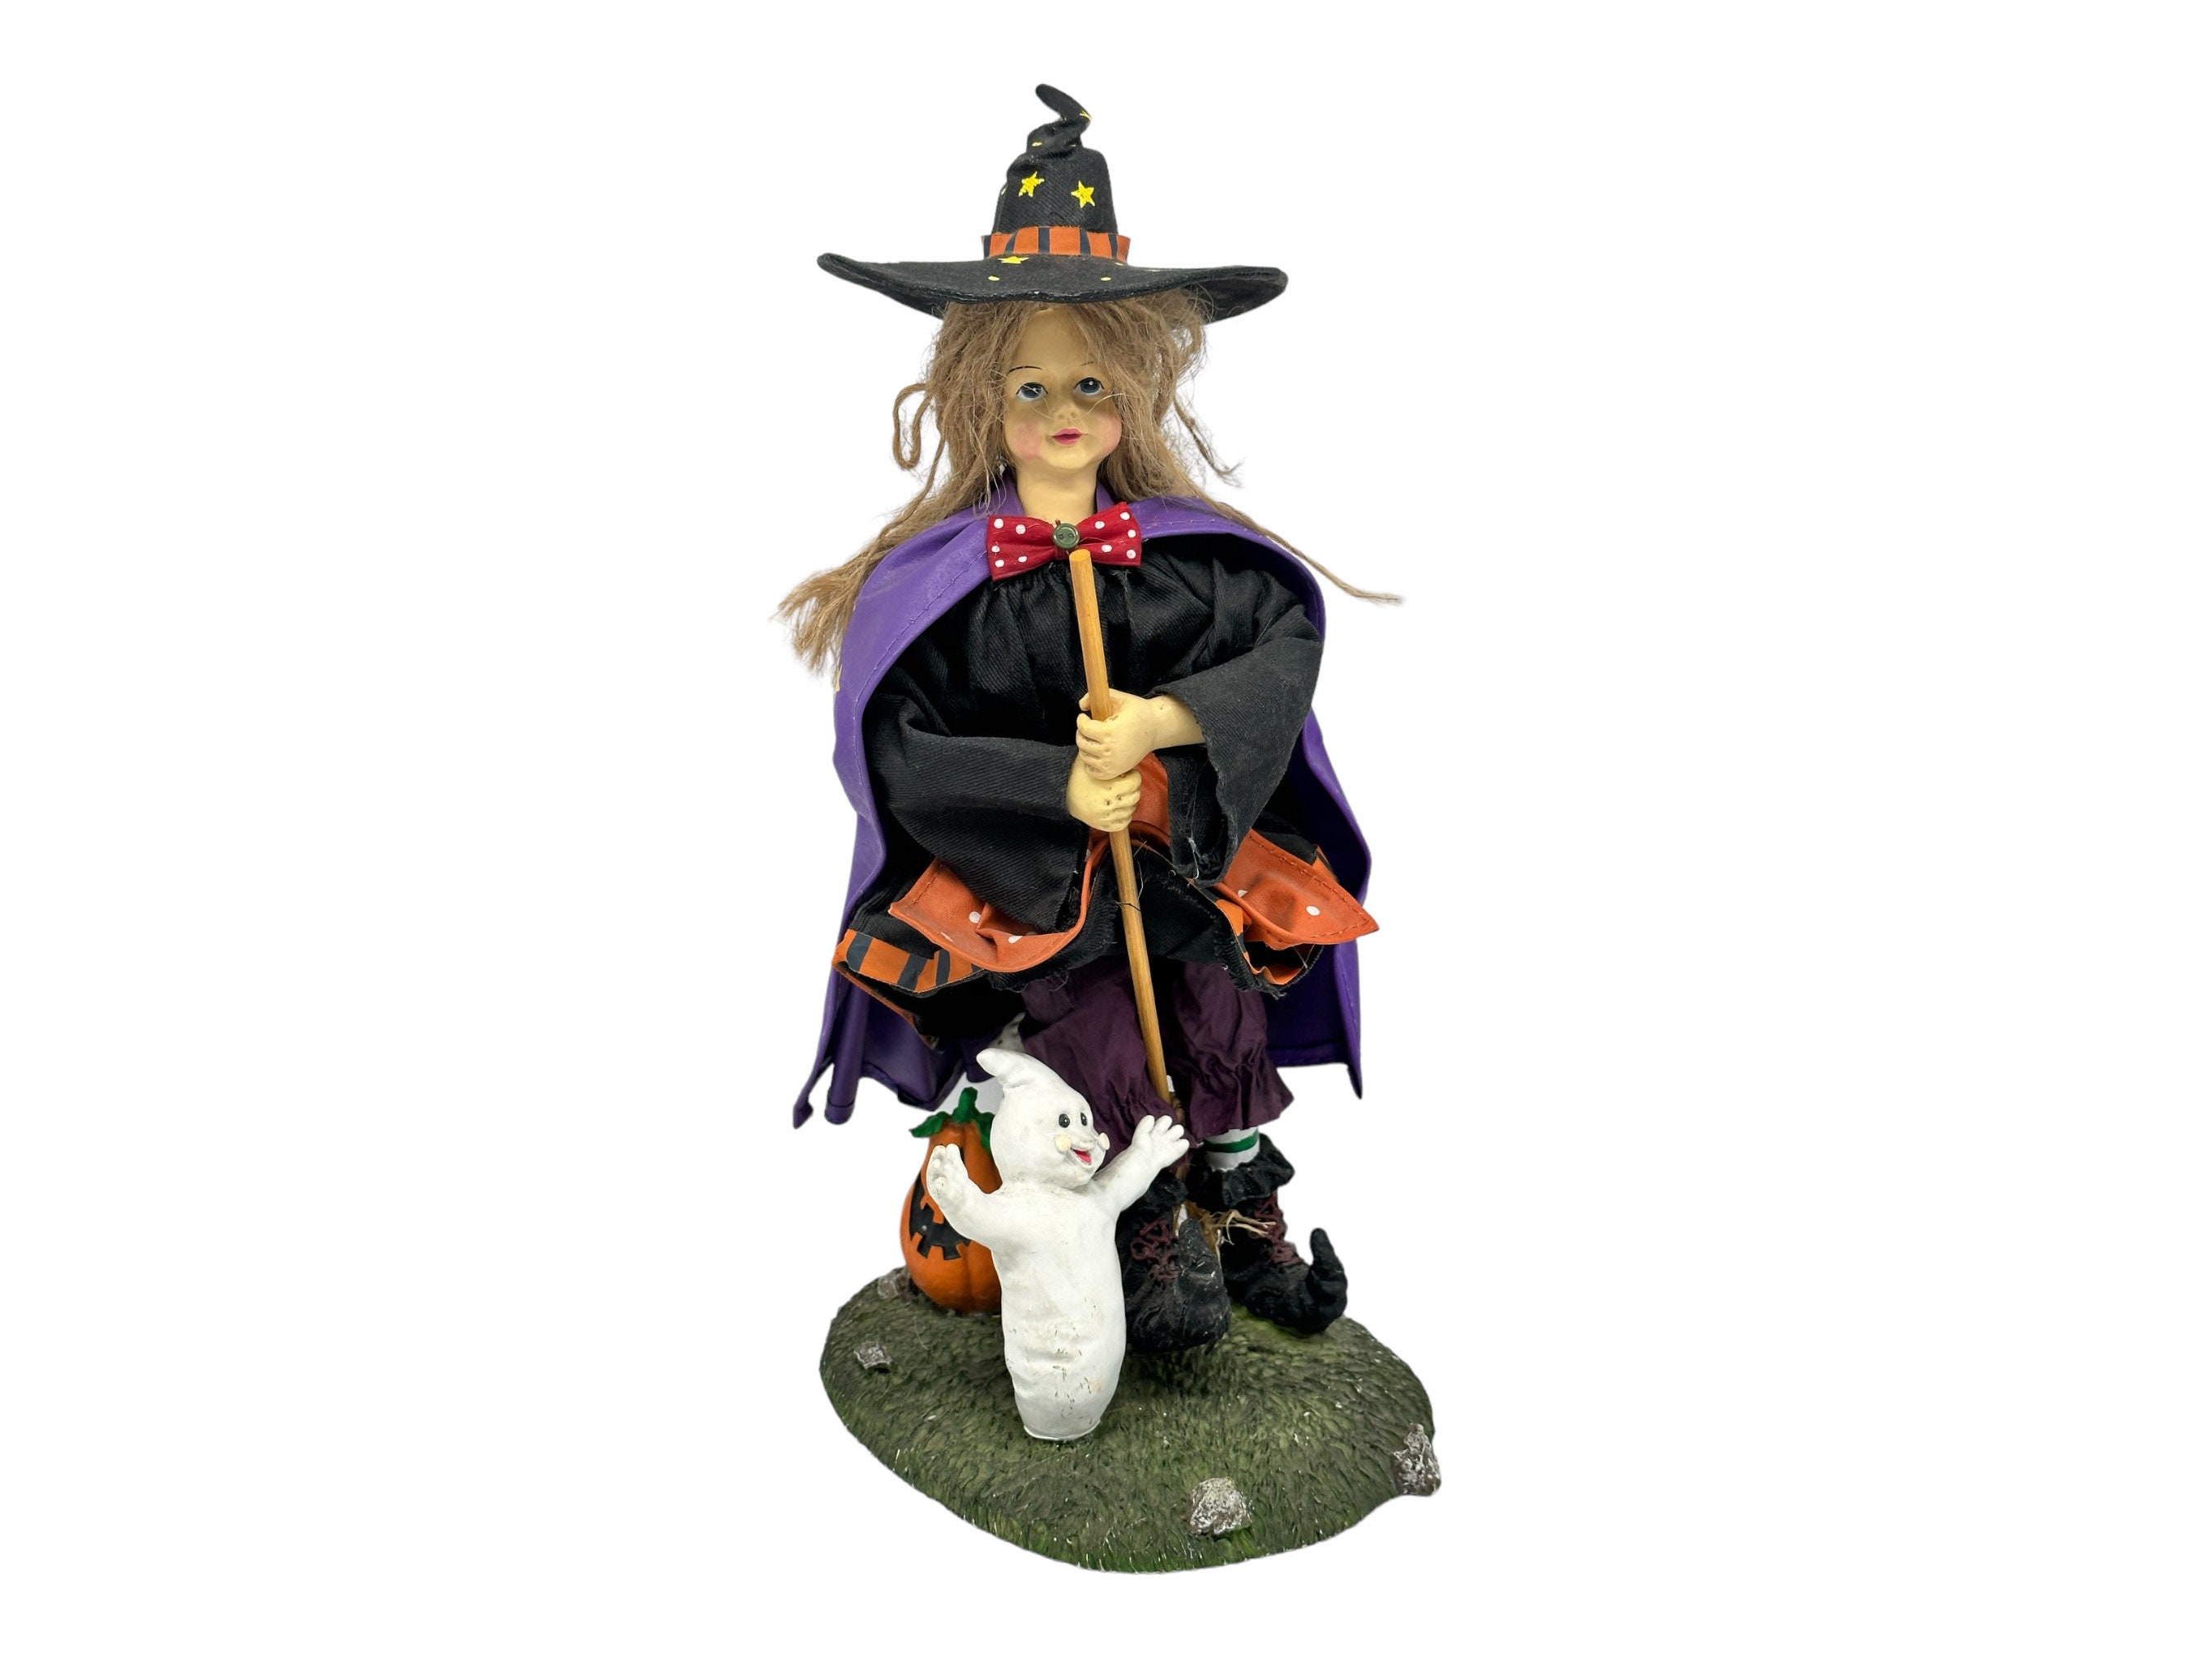 Handmade Ceramic Witch Statues, Witch Figurines, Halloween Decor